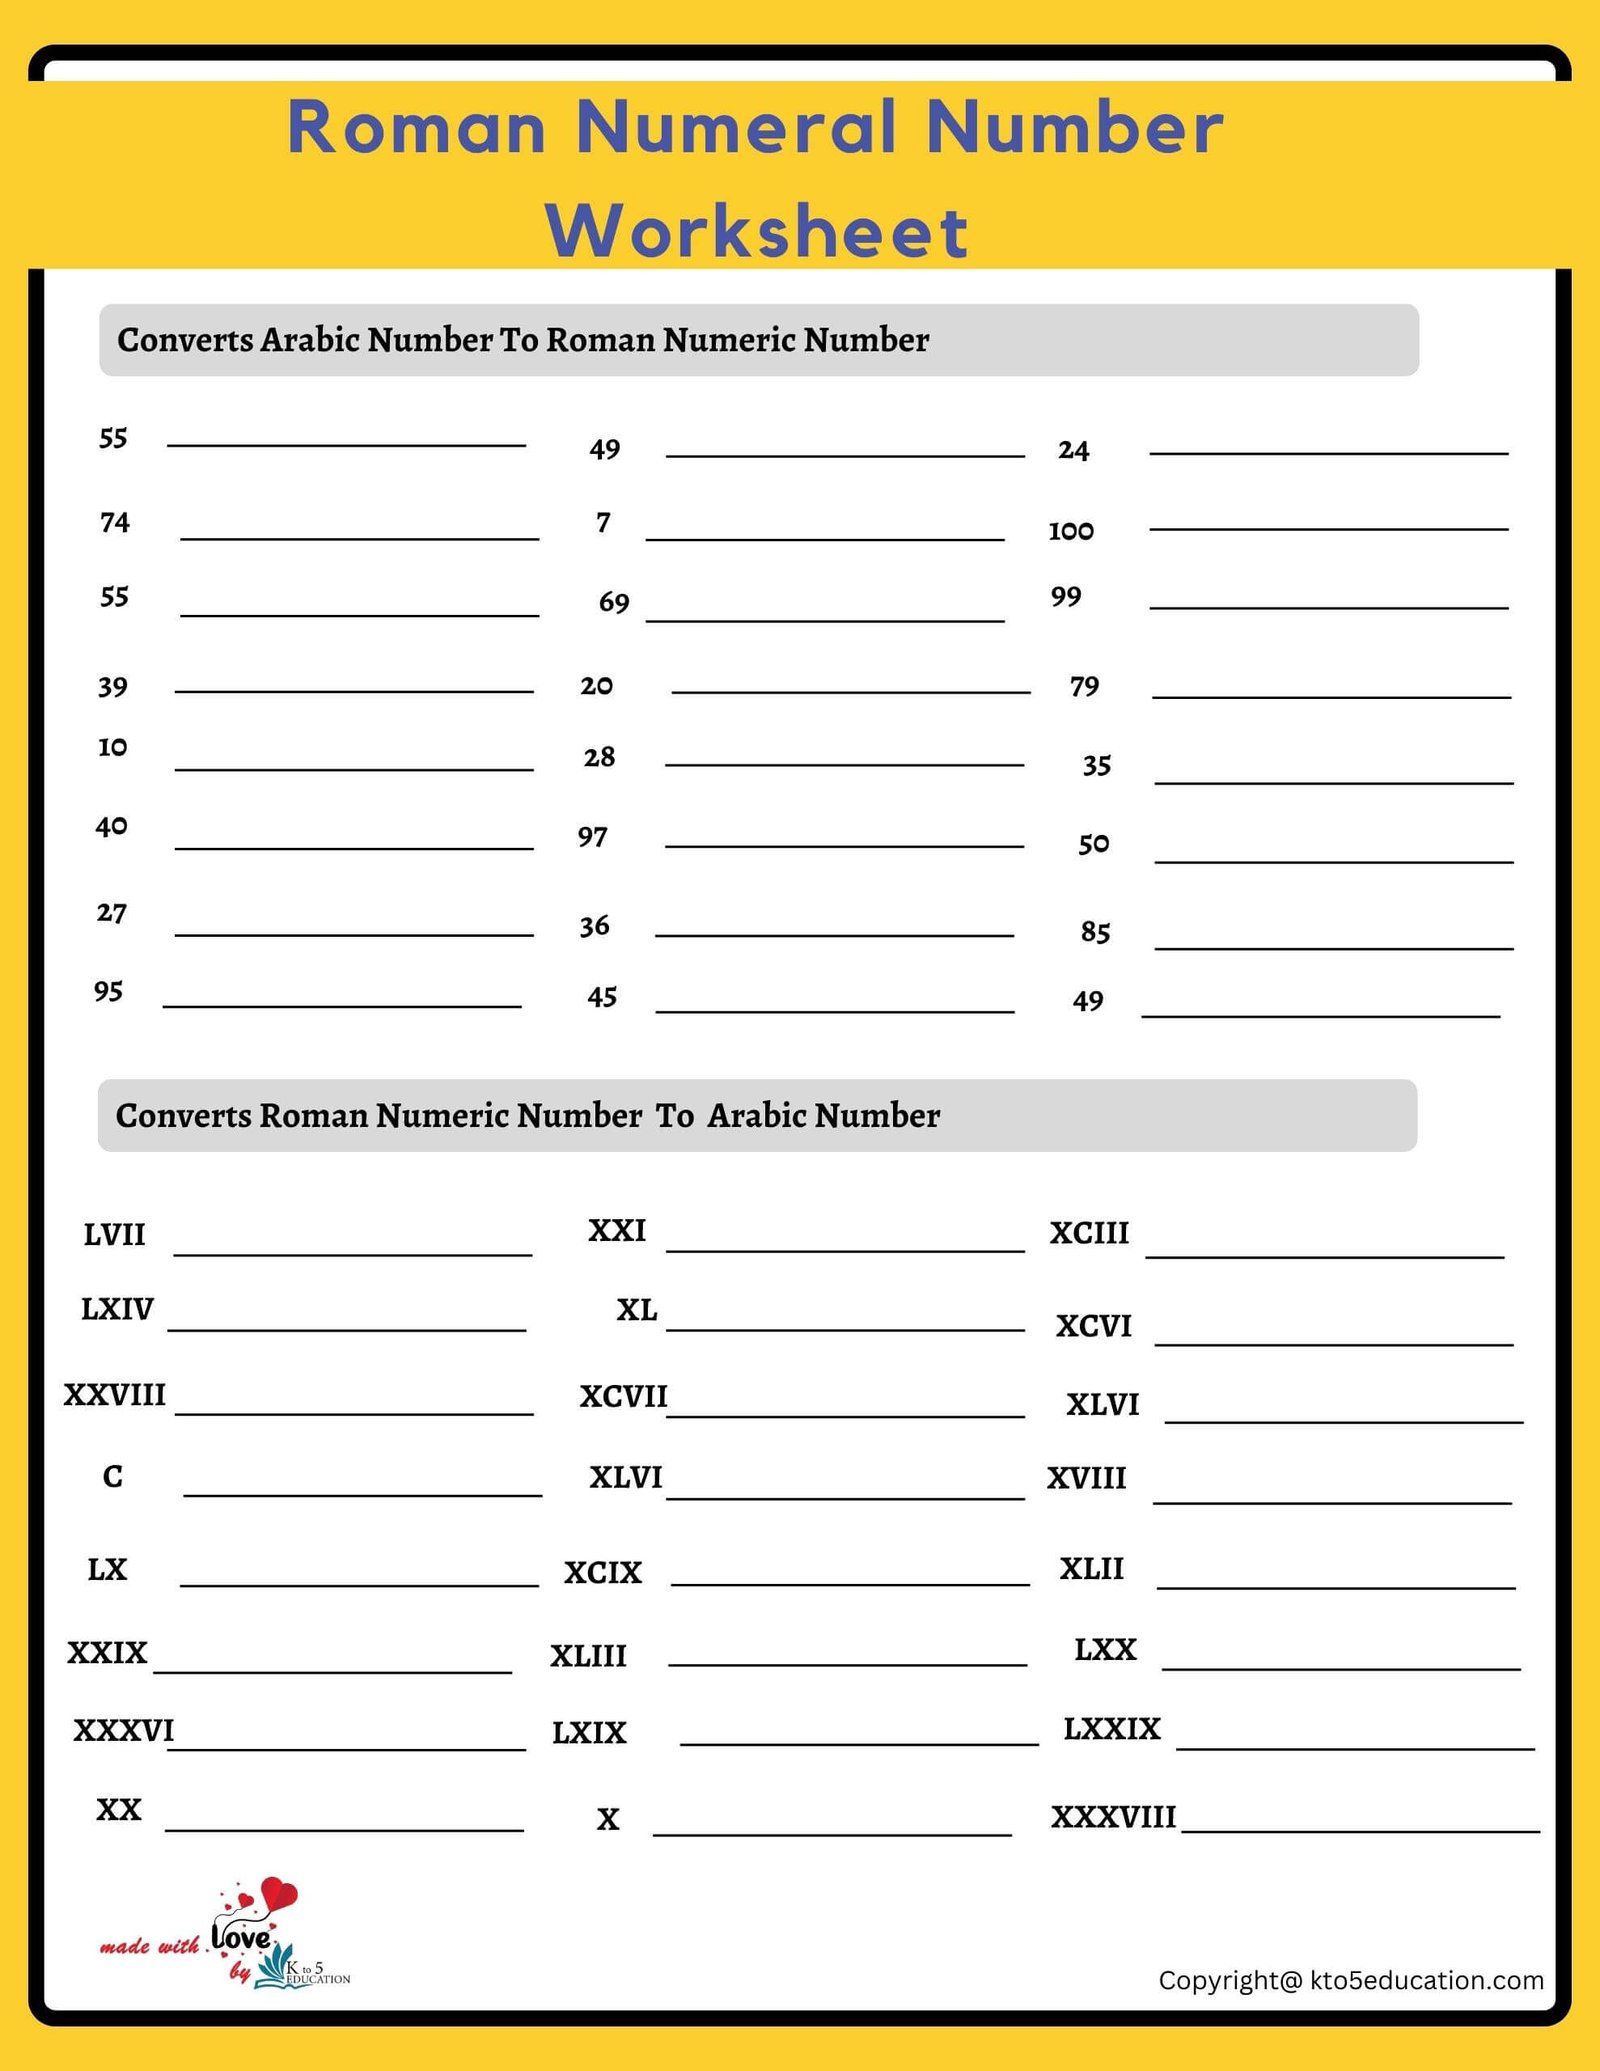 Roman Numeral Worksheet 1 to 100